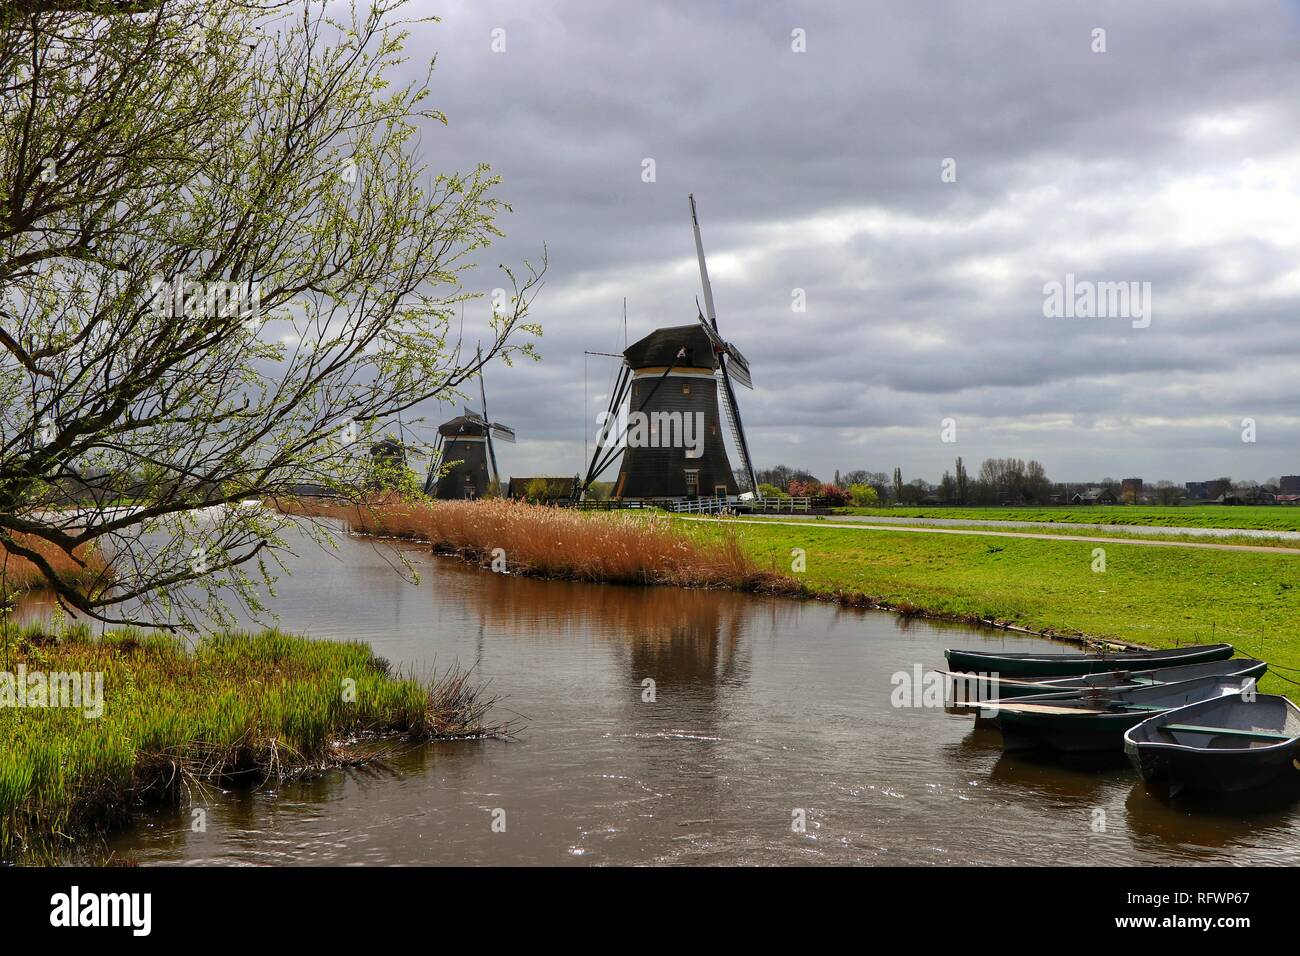 Rowing boats are moored on the mill pond, or polder, beside the iconic windmills of Stompwijkse Vaart, near The Hague, Holland. Stock Photo